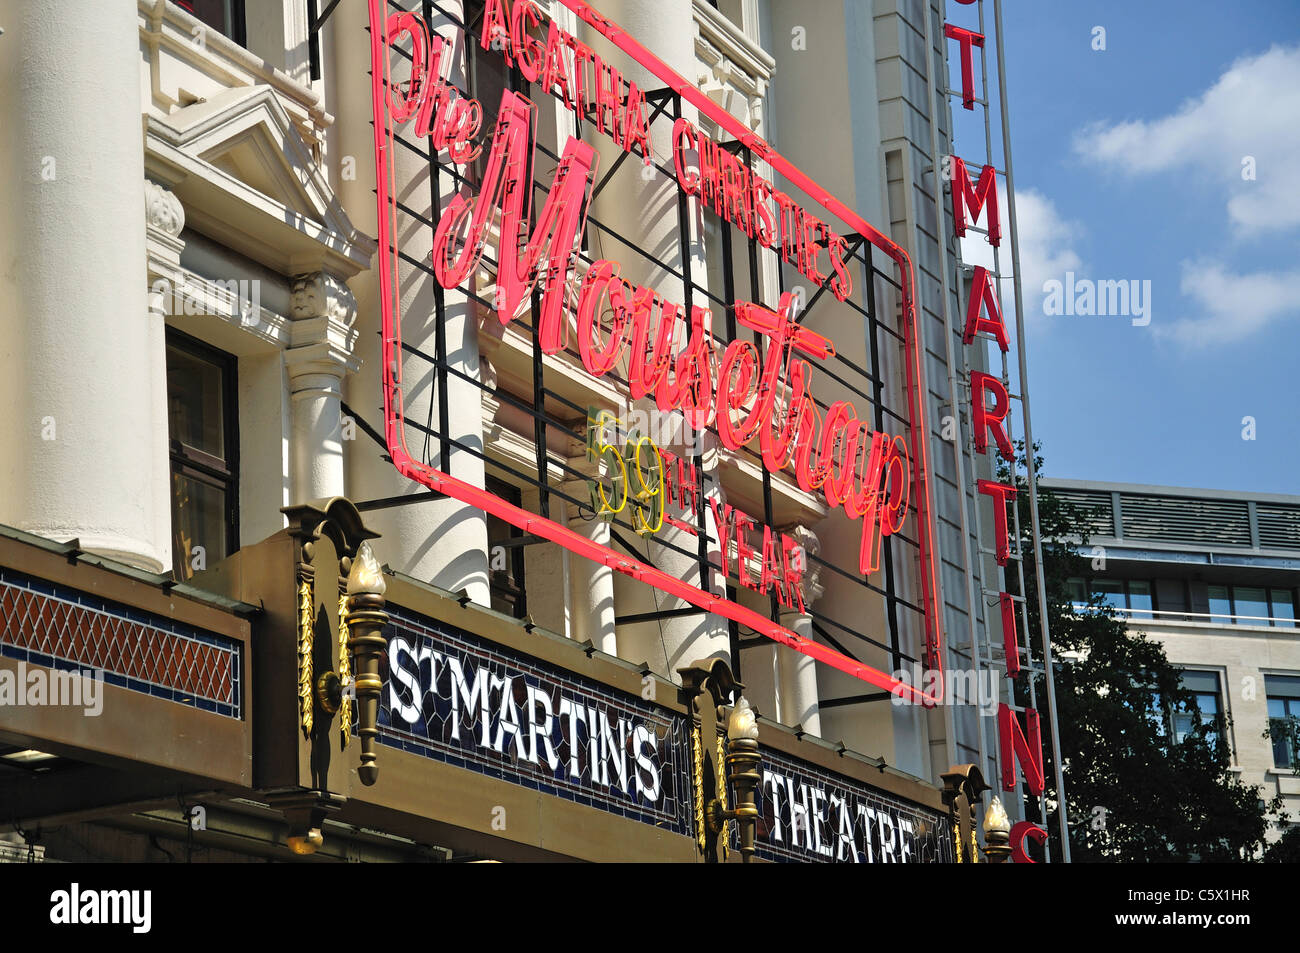 Agatha Christie's 'The Mousetrap' play, St.Martin's Theatre, West Street, Covent Garden, Greater London, England, United Kingdom Stock Photo